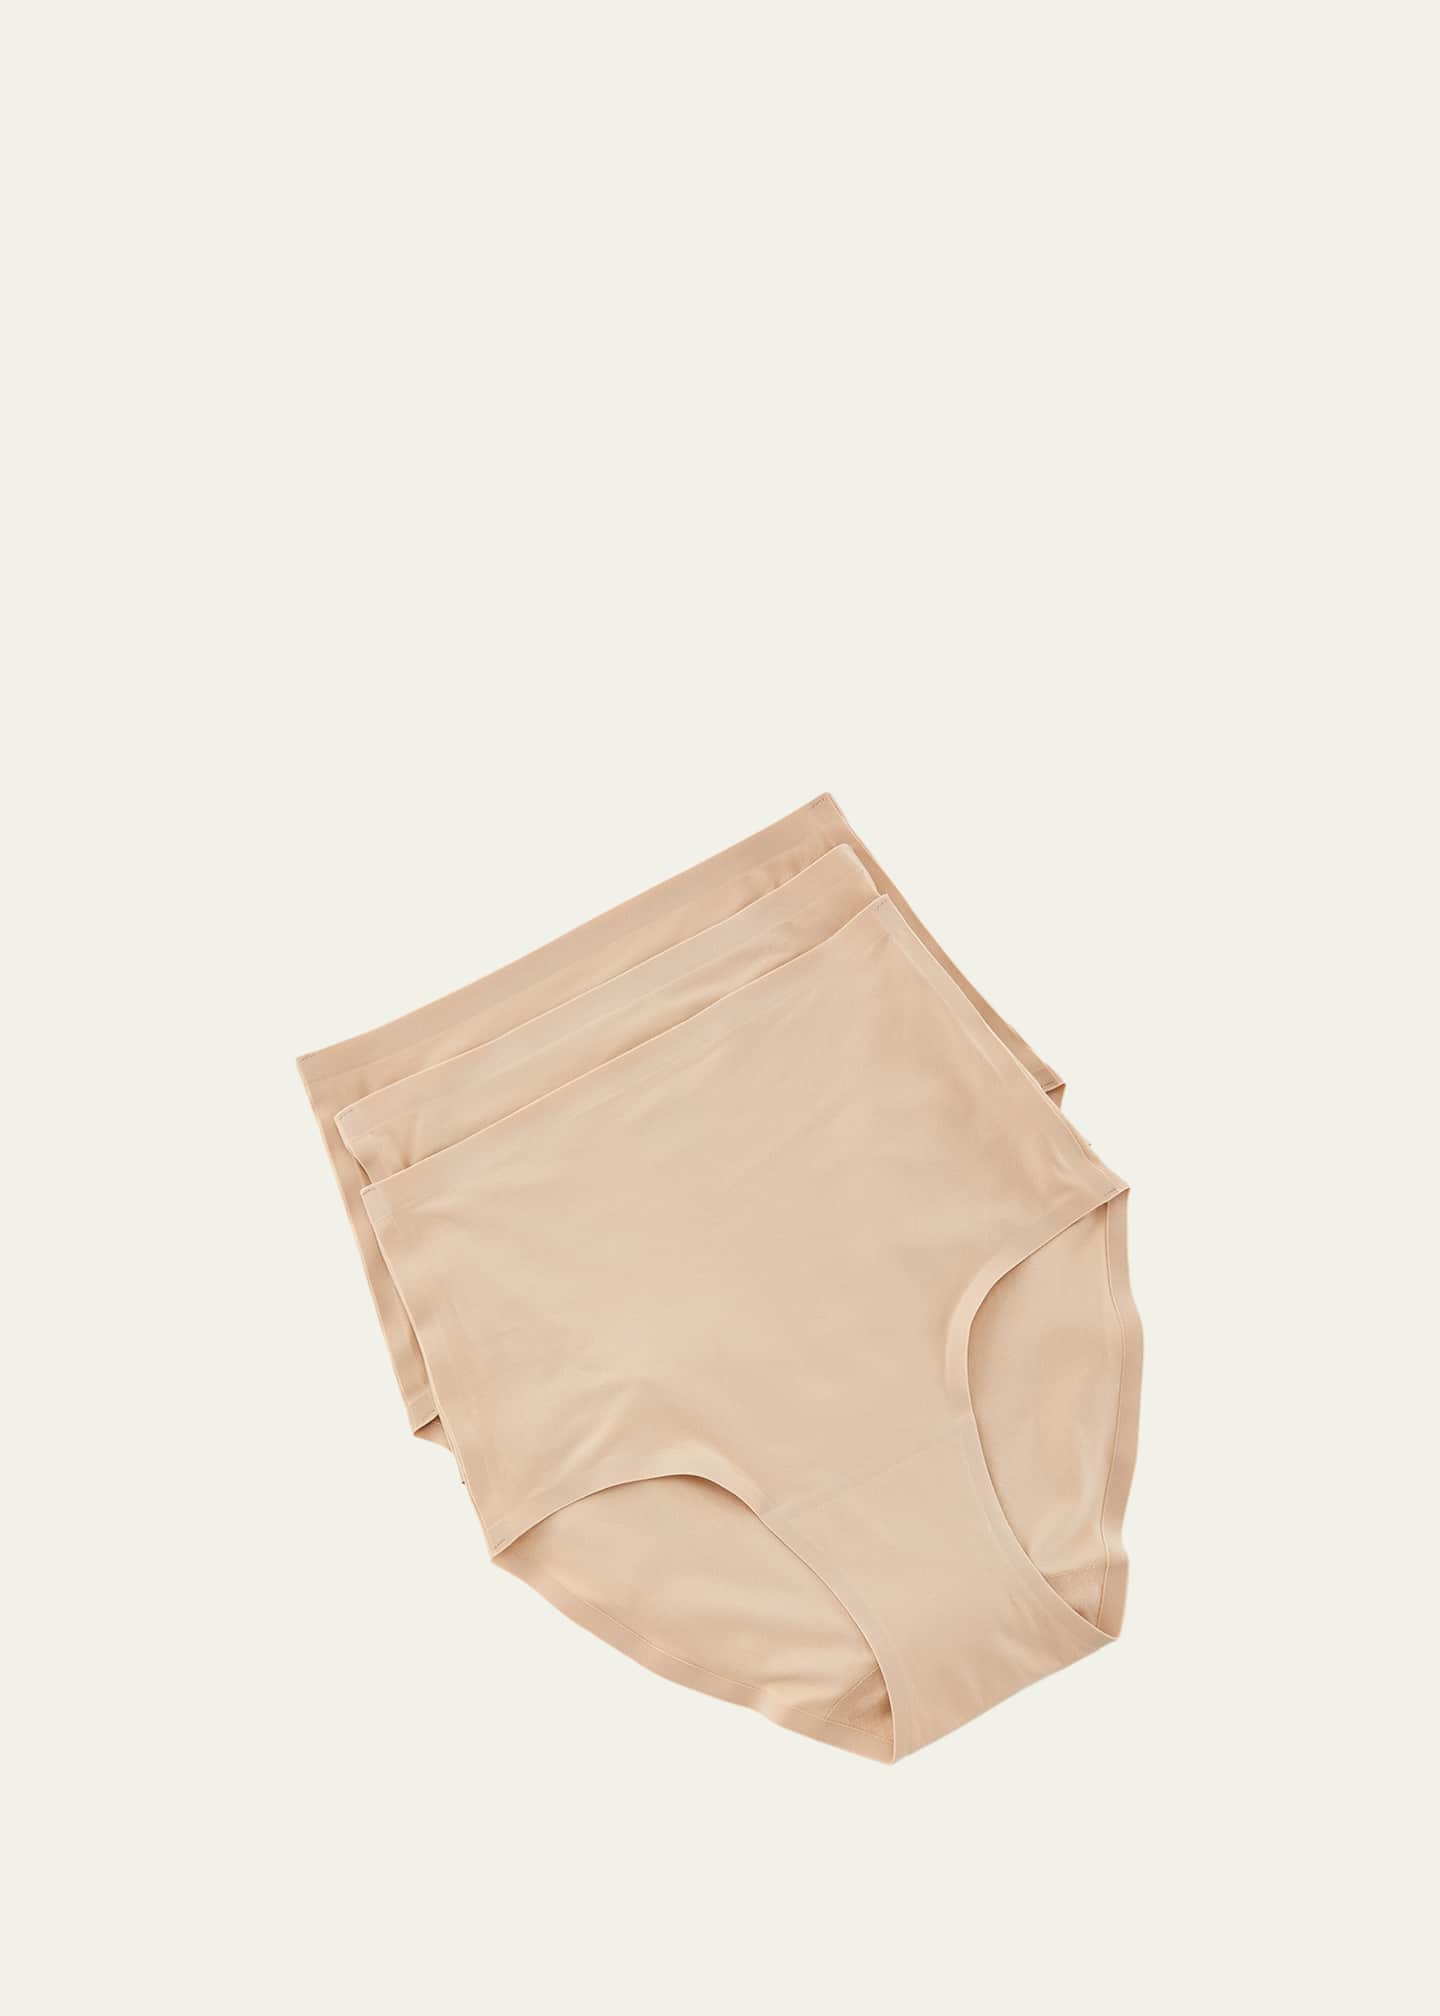 Chantelle SoftStretch Full Brief